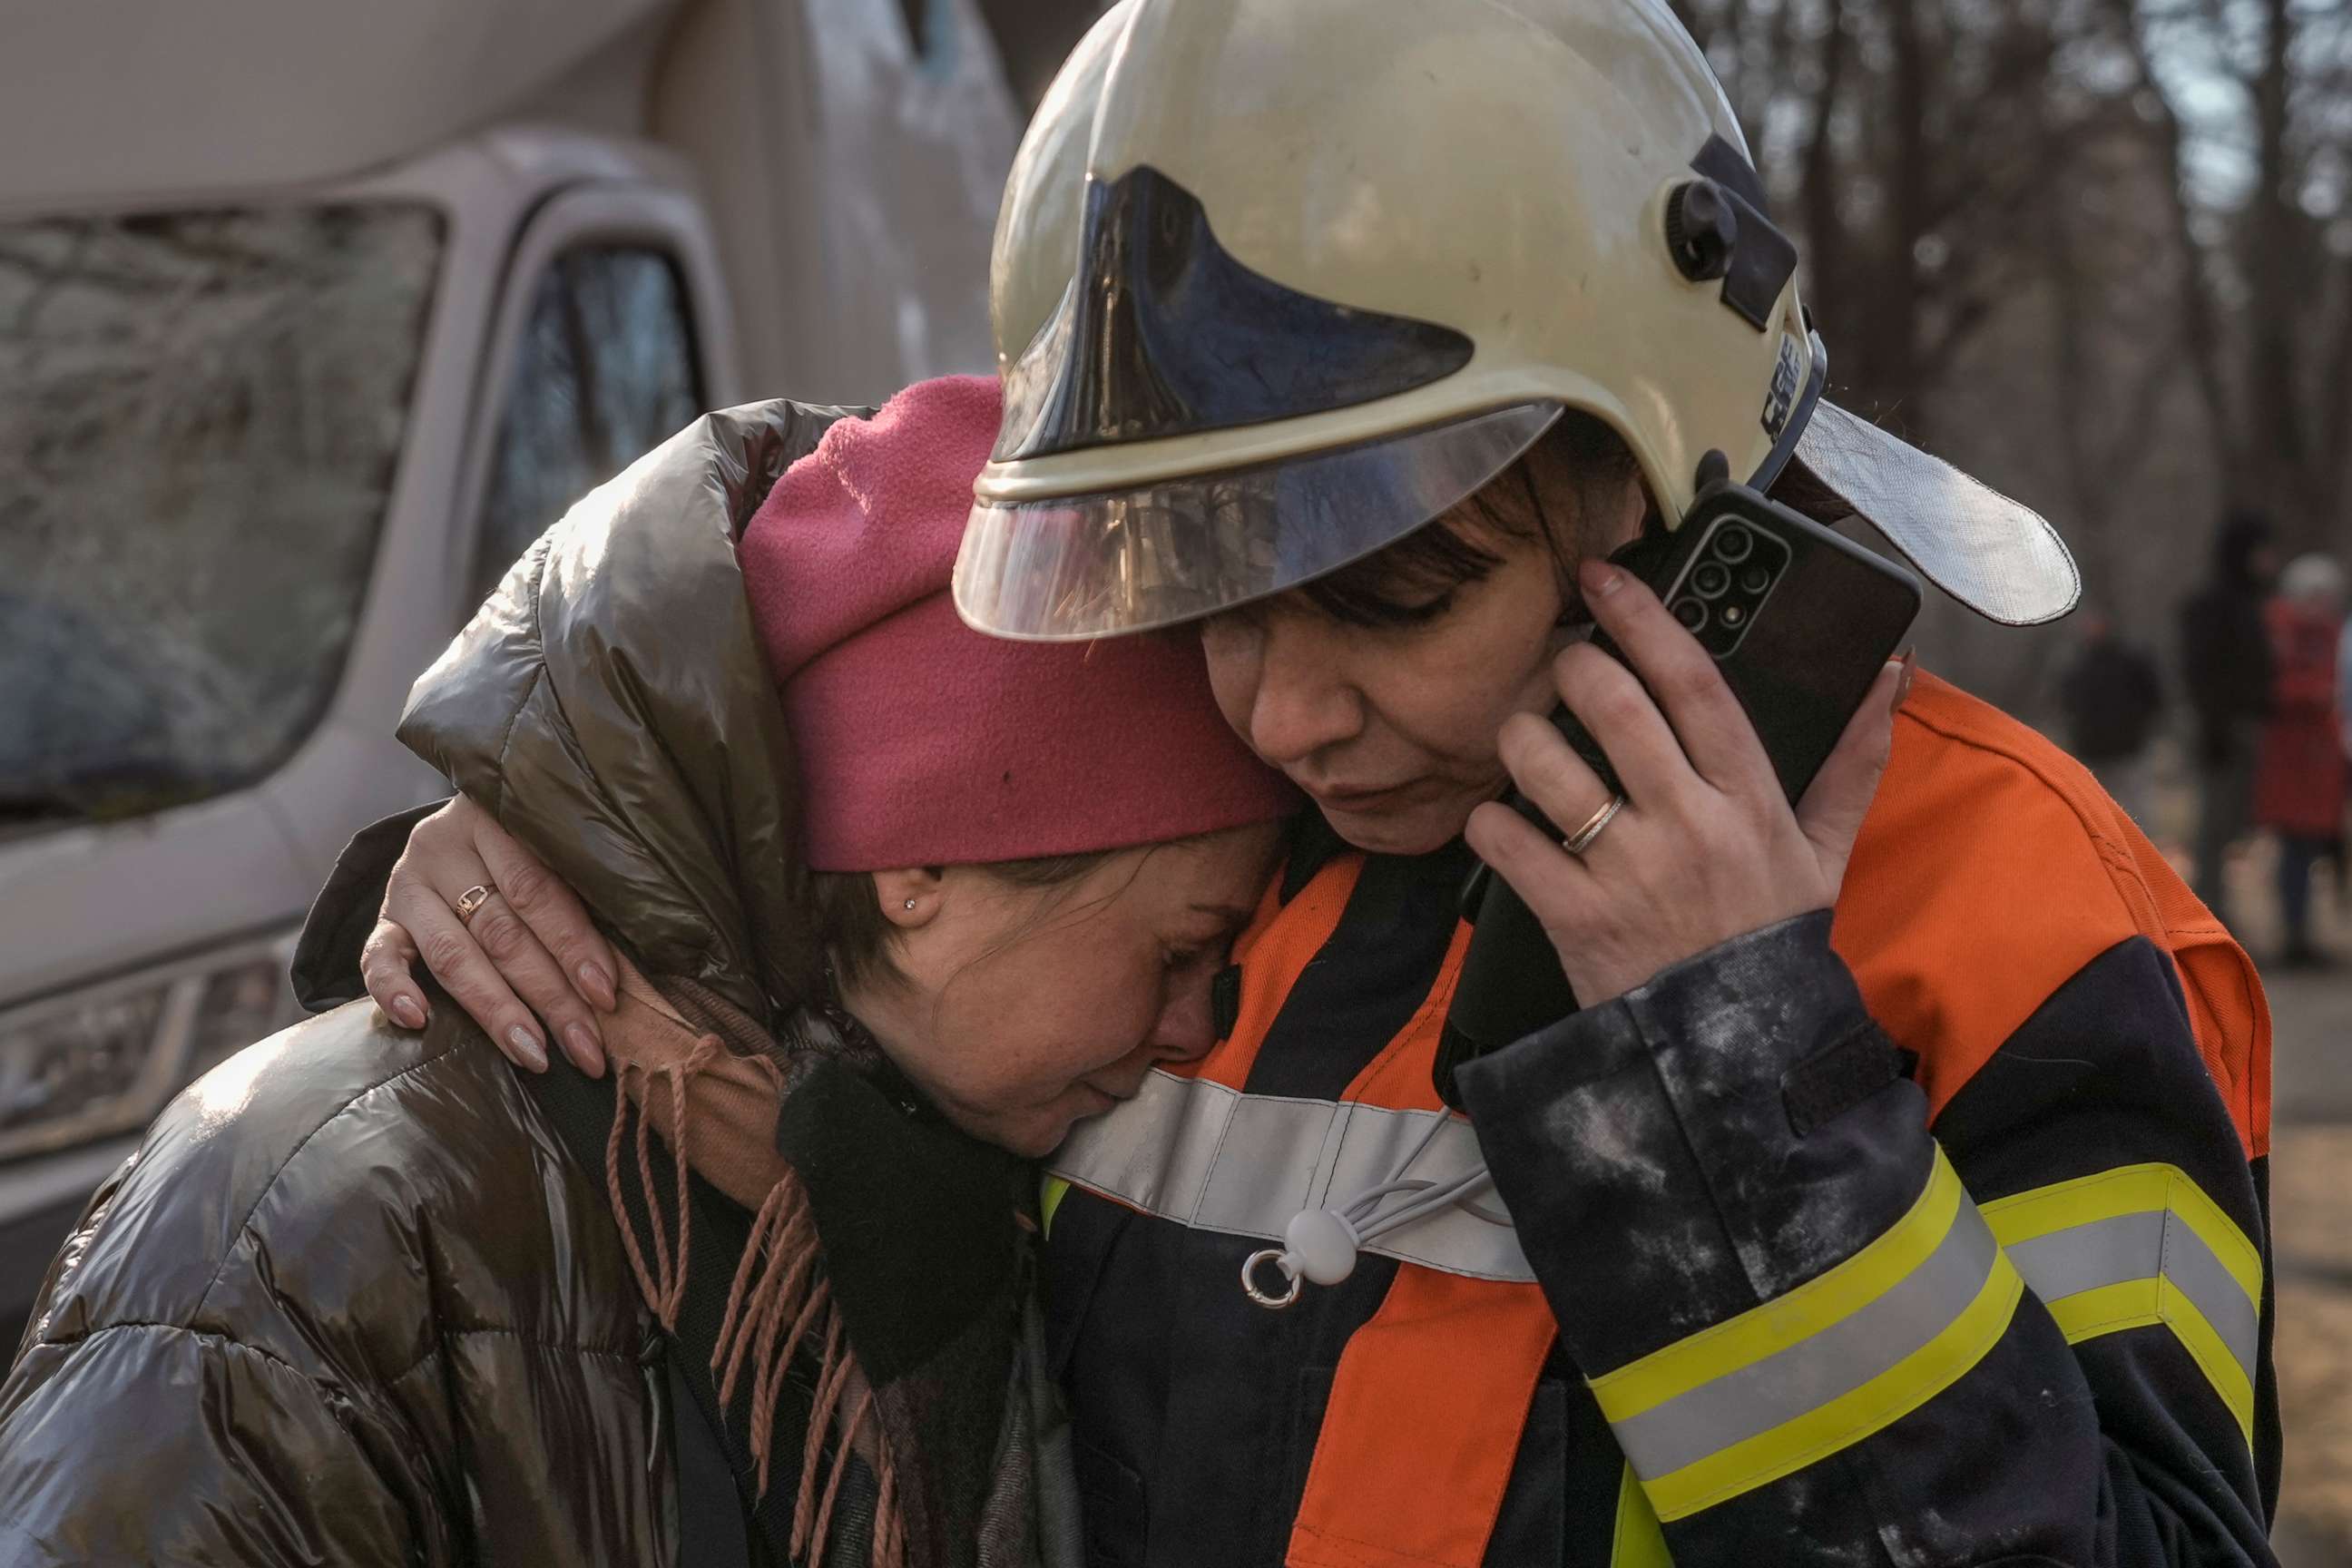 PHOTO: A firefighter comforts a woman outside a destroyed apartment building in a residential area in Kyiv, Ukraine, March 15, 2022.